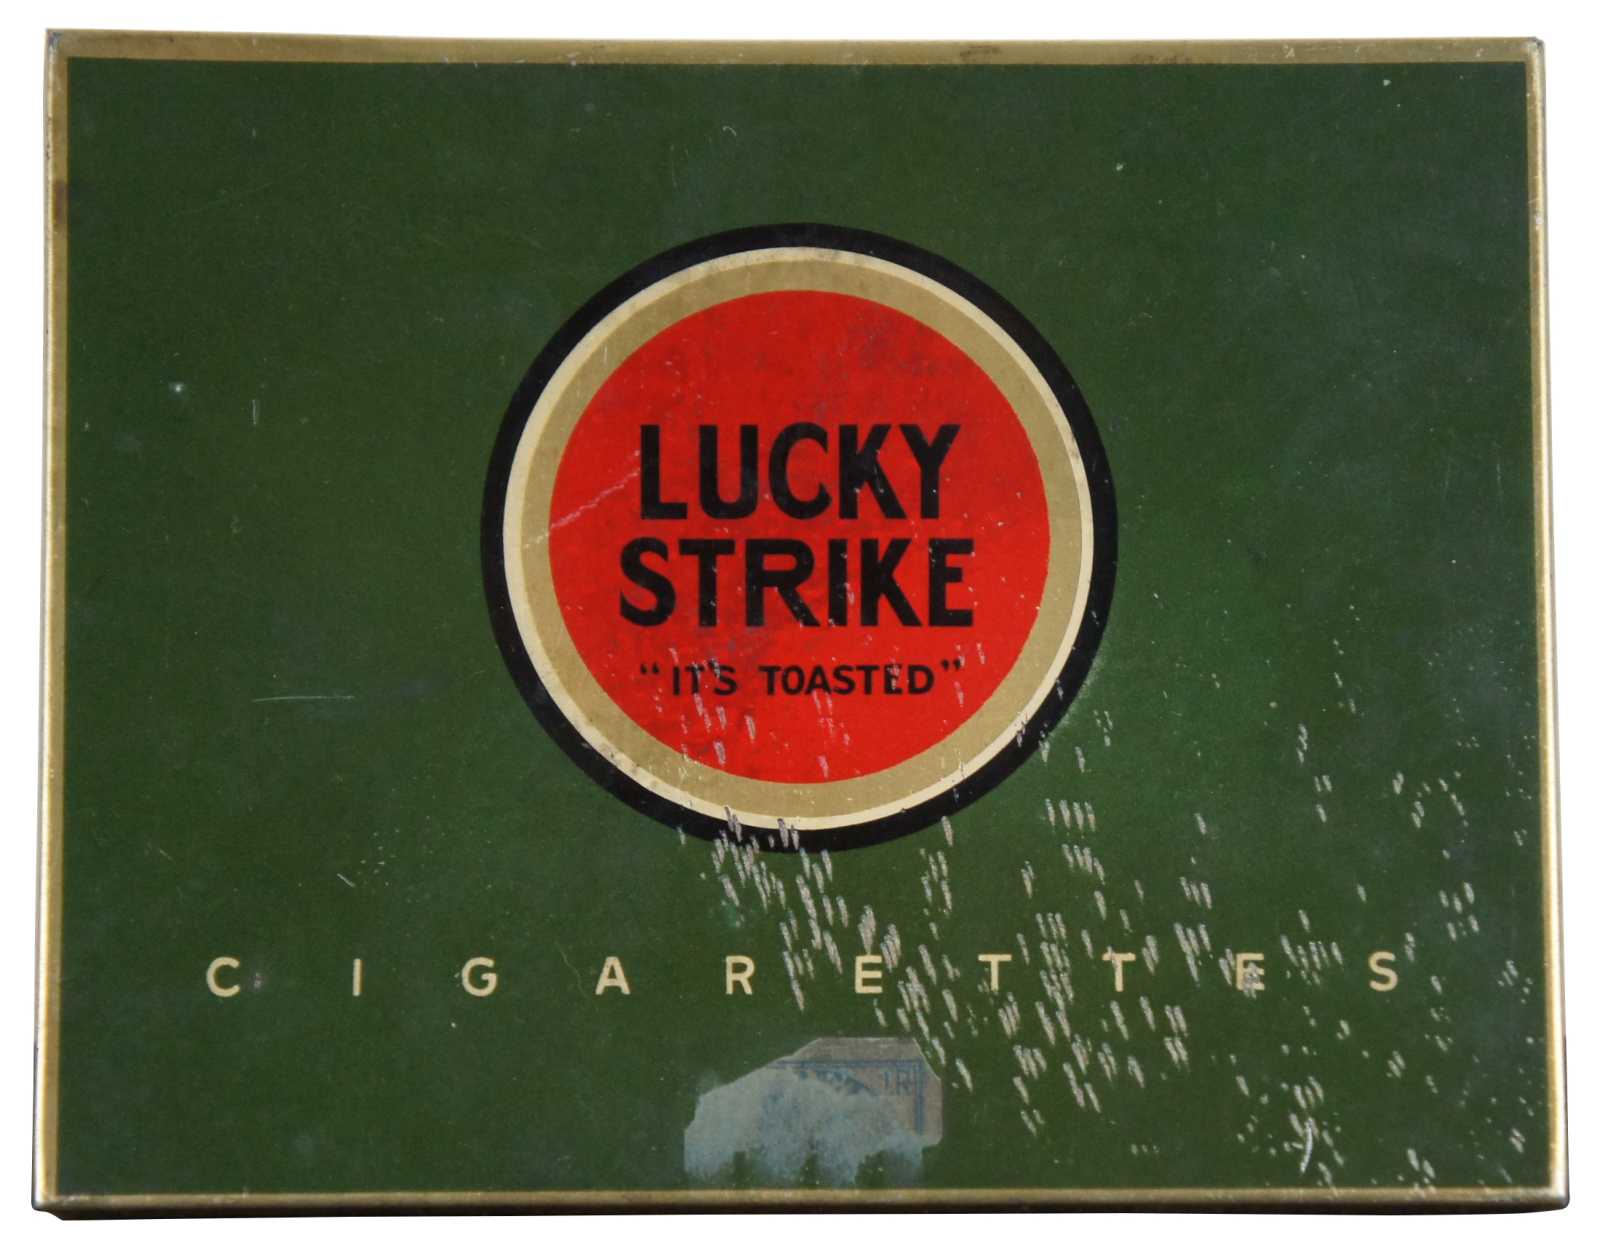 1940 Antique Lucky Strike It's Toasted Advertising Cigarette Tin